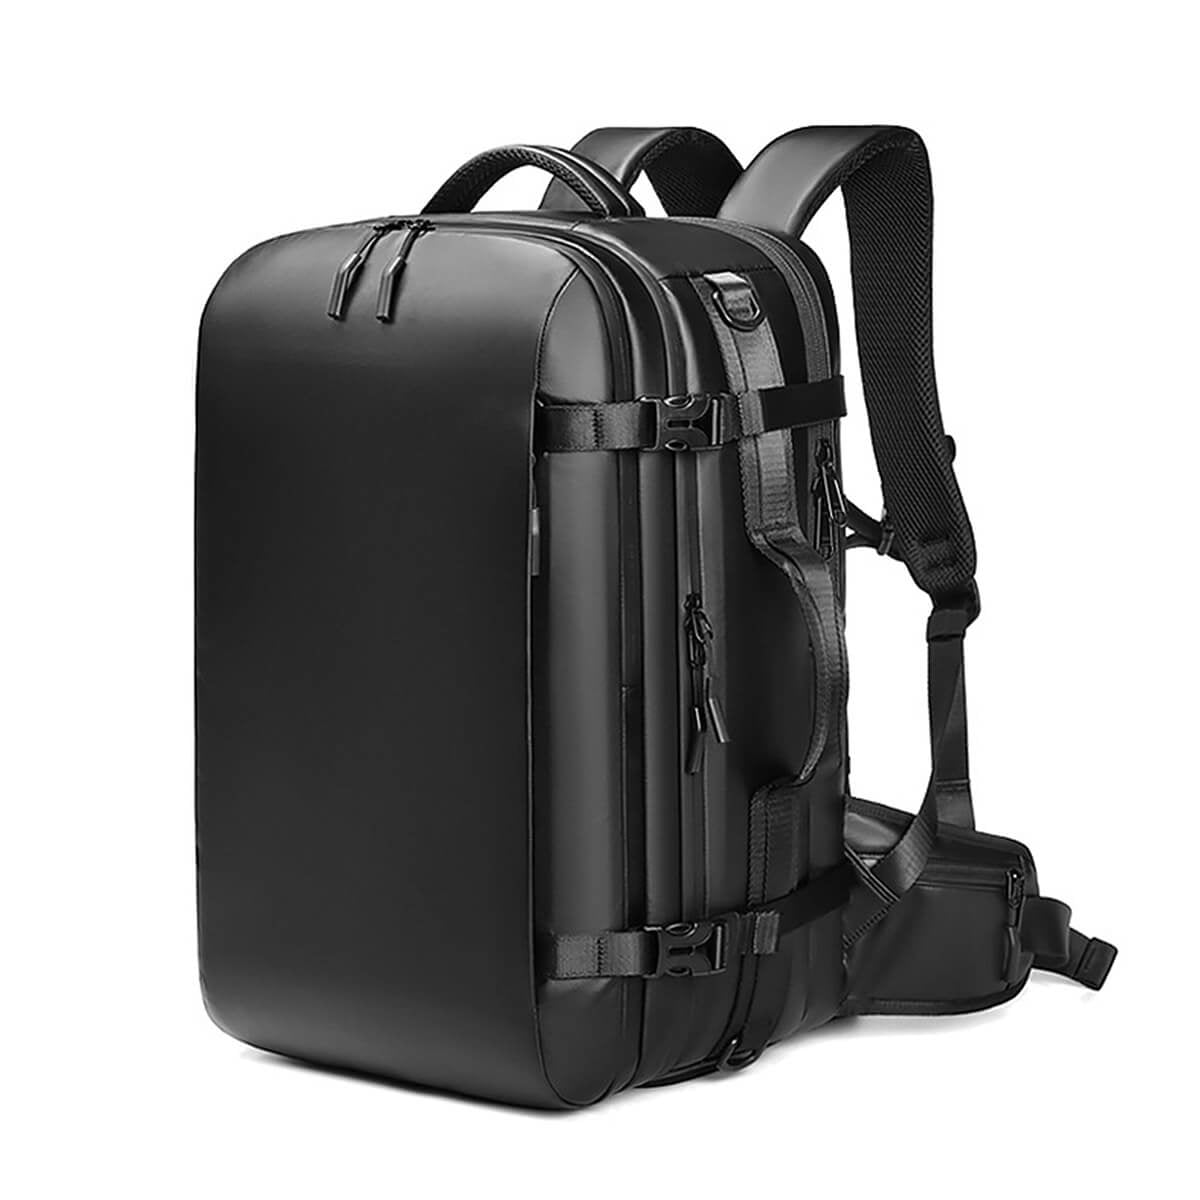 Buy Swiss Military Black Soft Small Laptop Trolley Bag Online At Best Price  @ Tata CLiQ